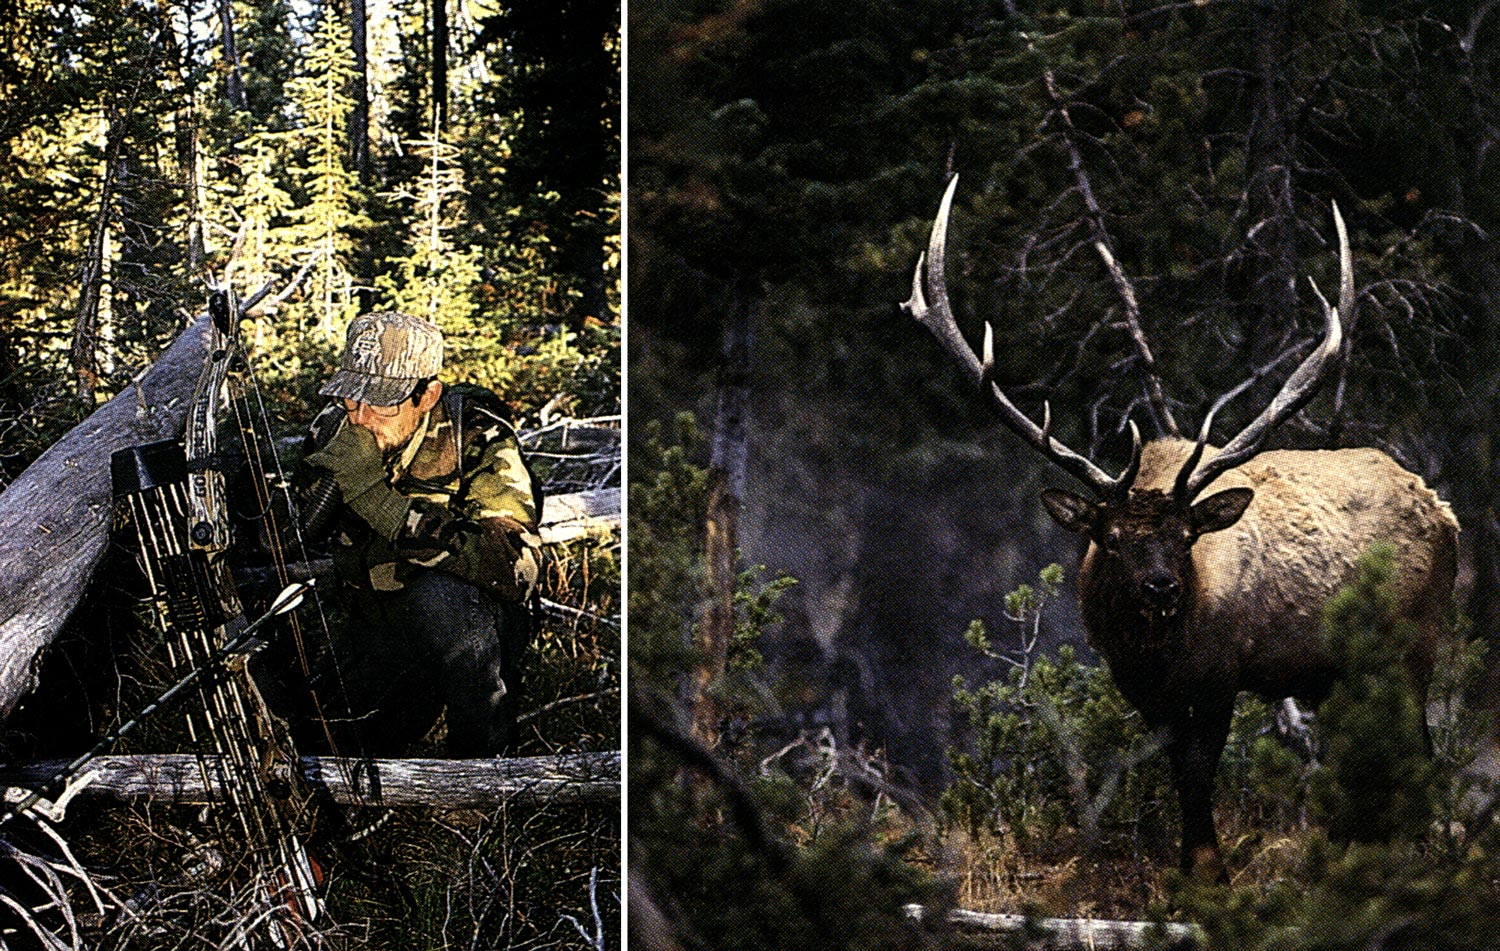 hunter with compound bow crouches behind fallen trees and blows into elk call; lone bull elk in forest